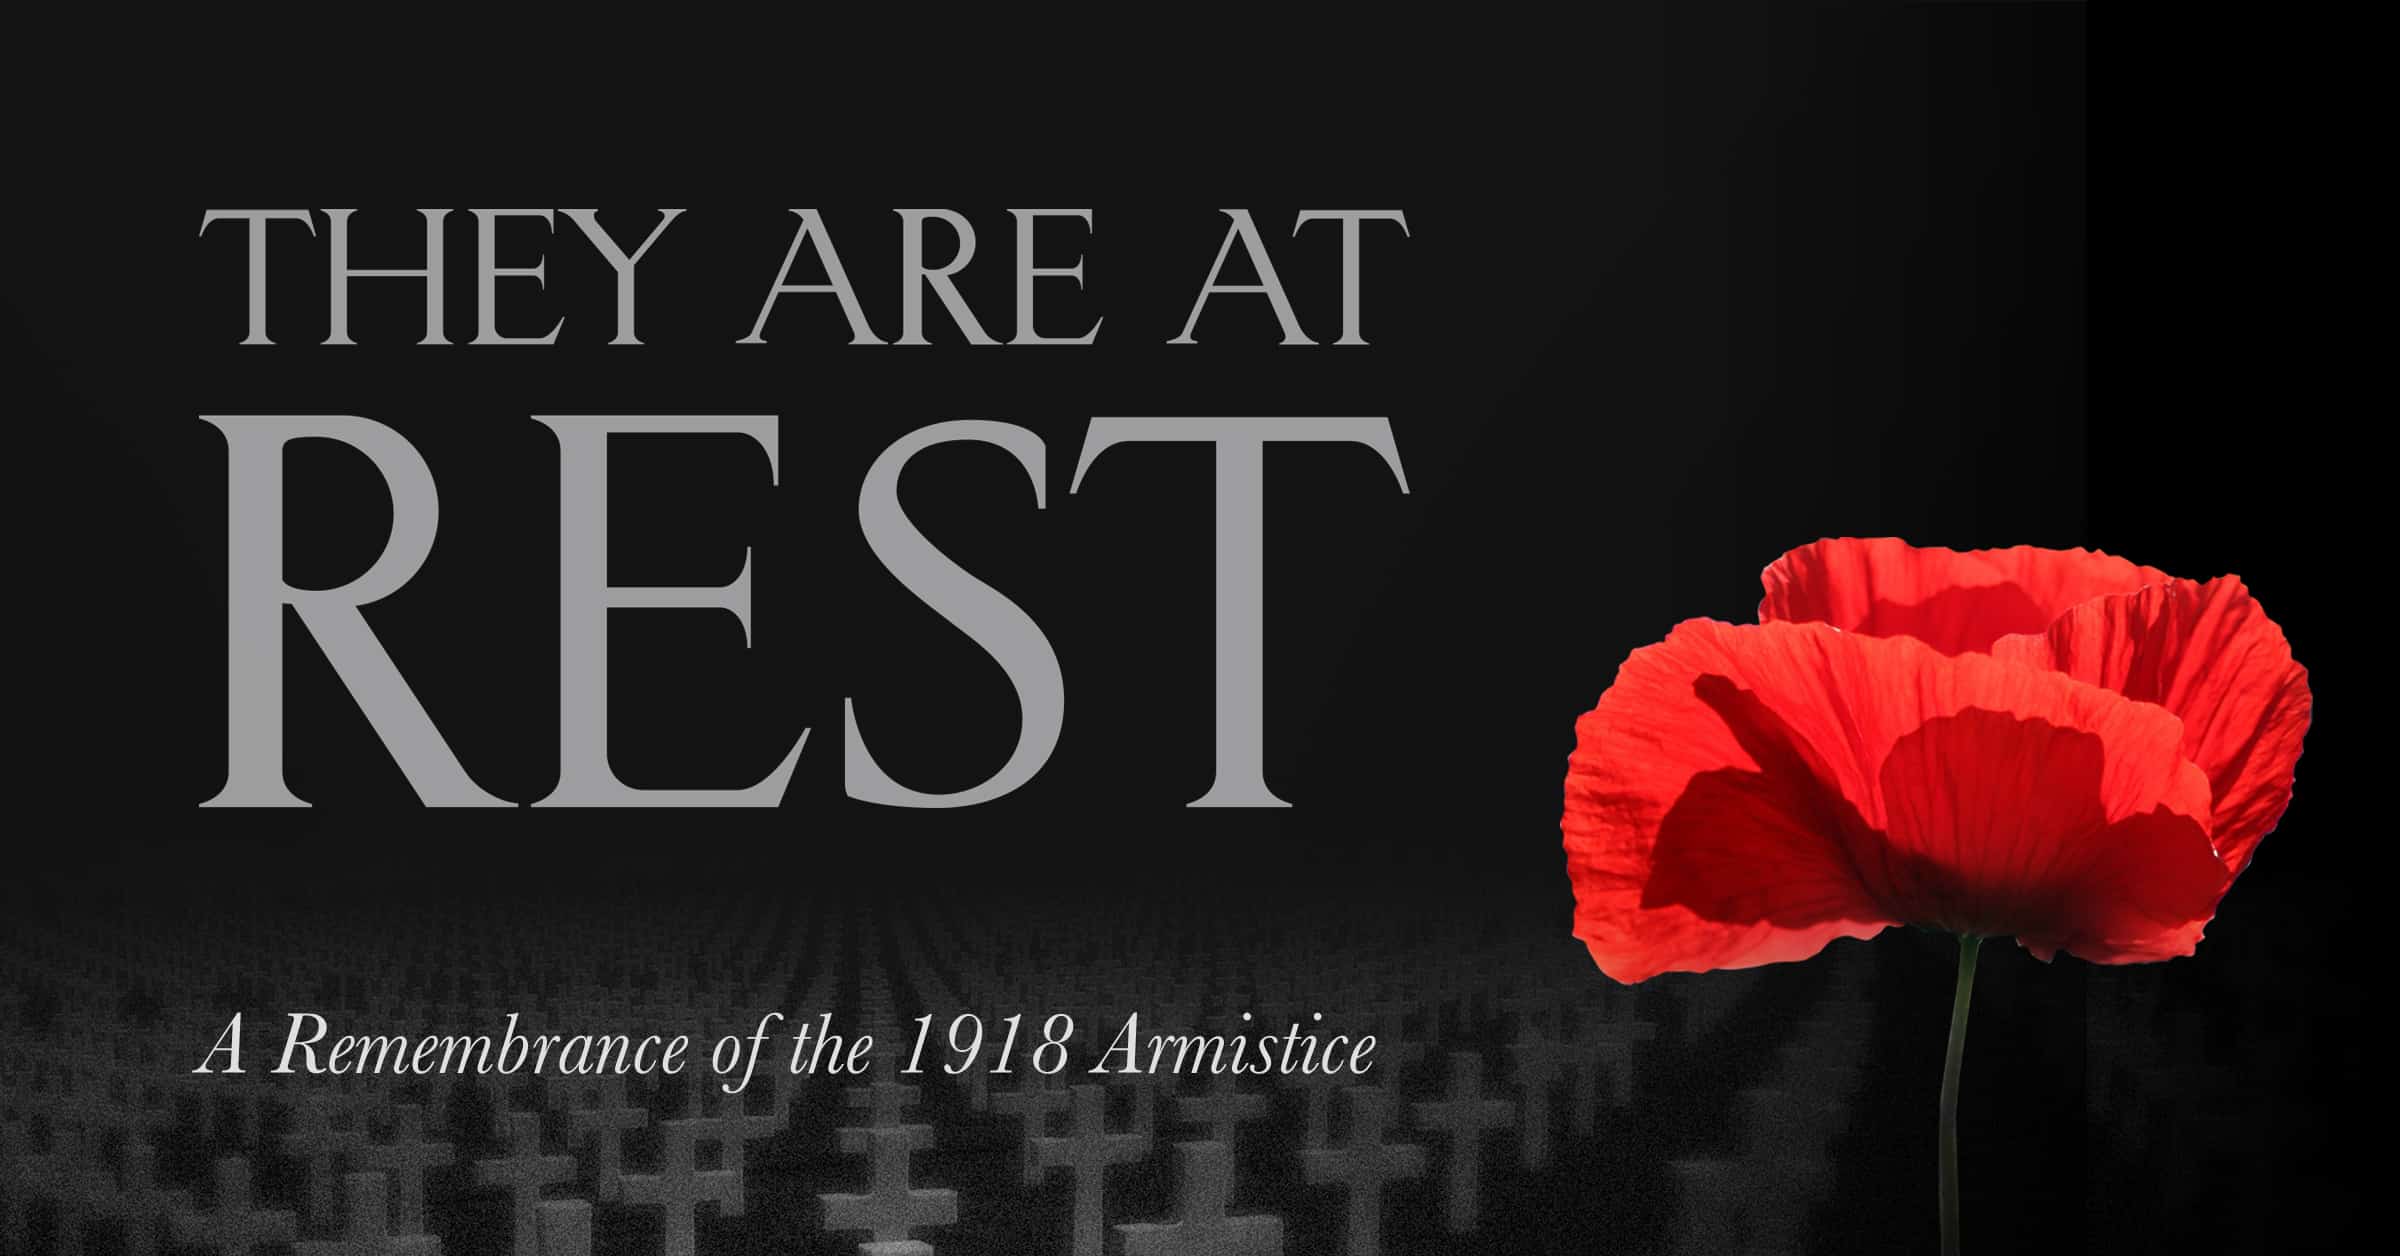 The History of the Remembrance Poppy